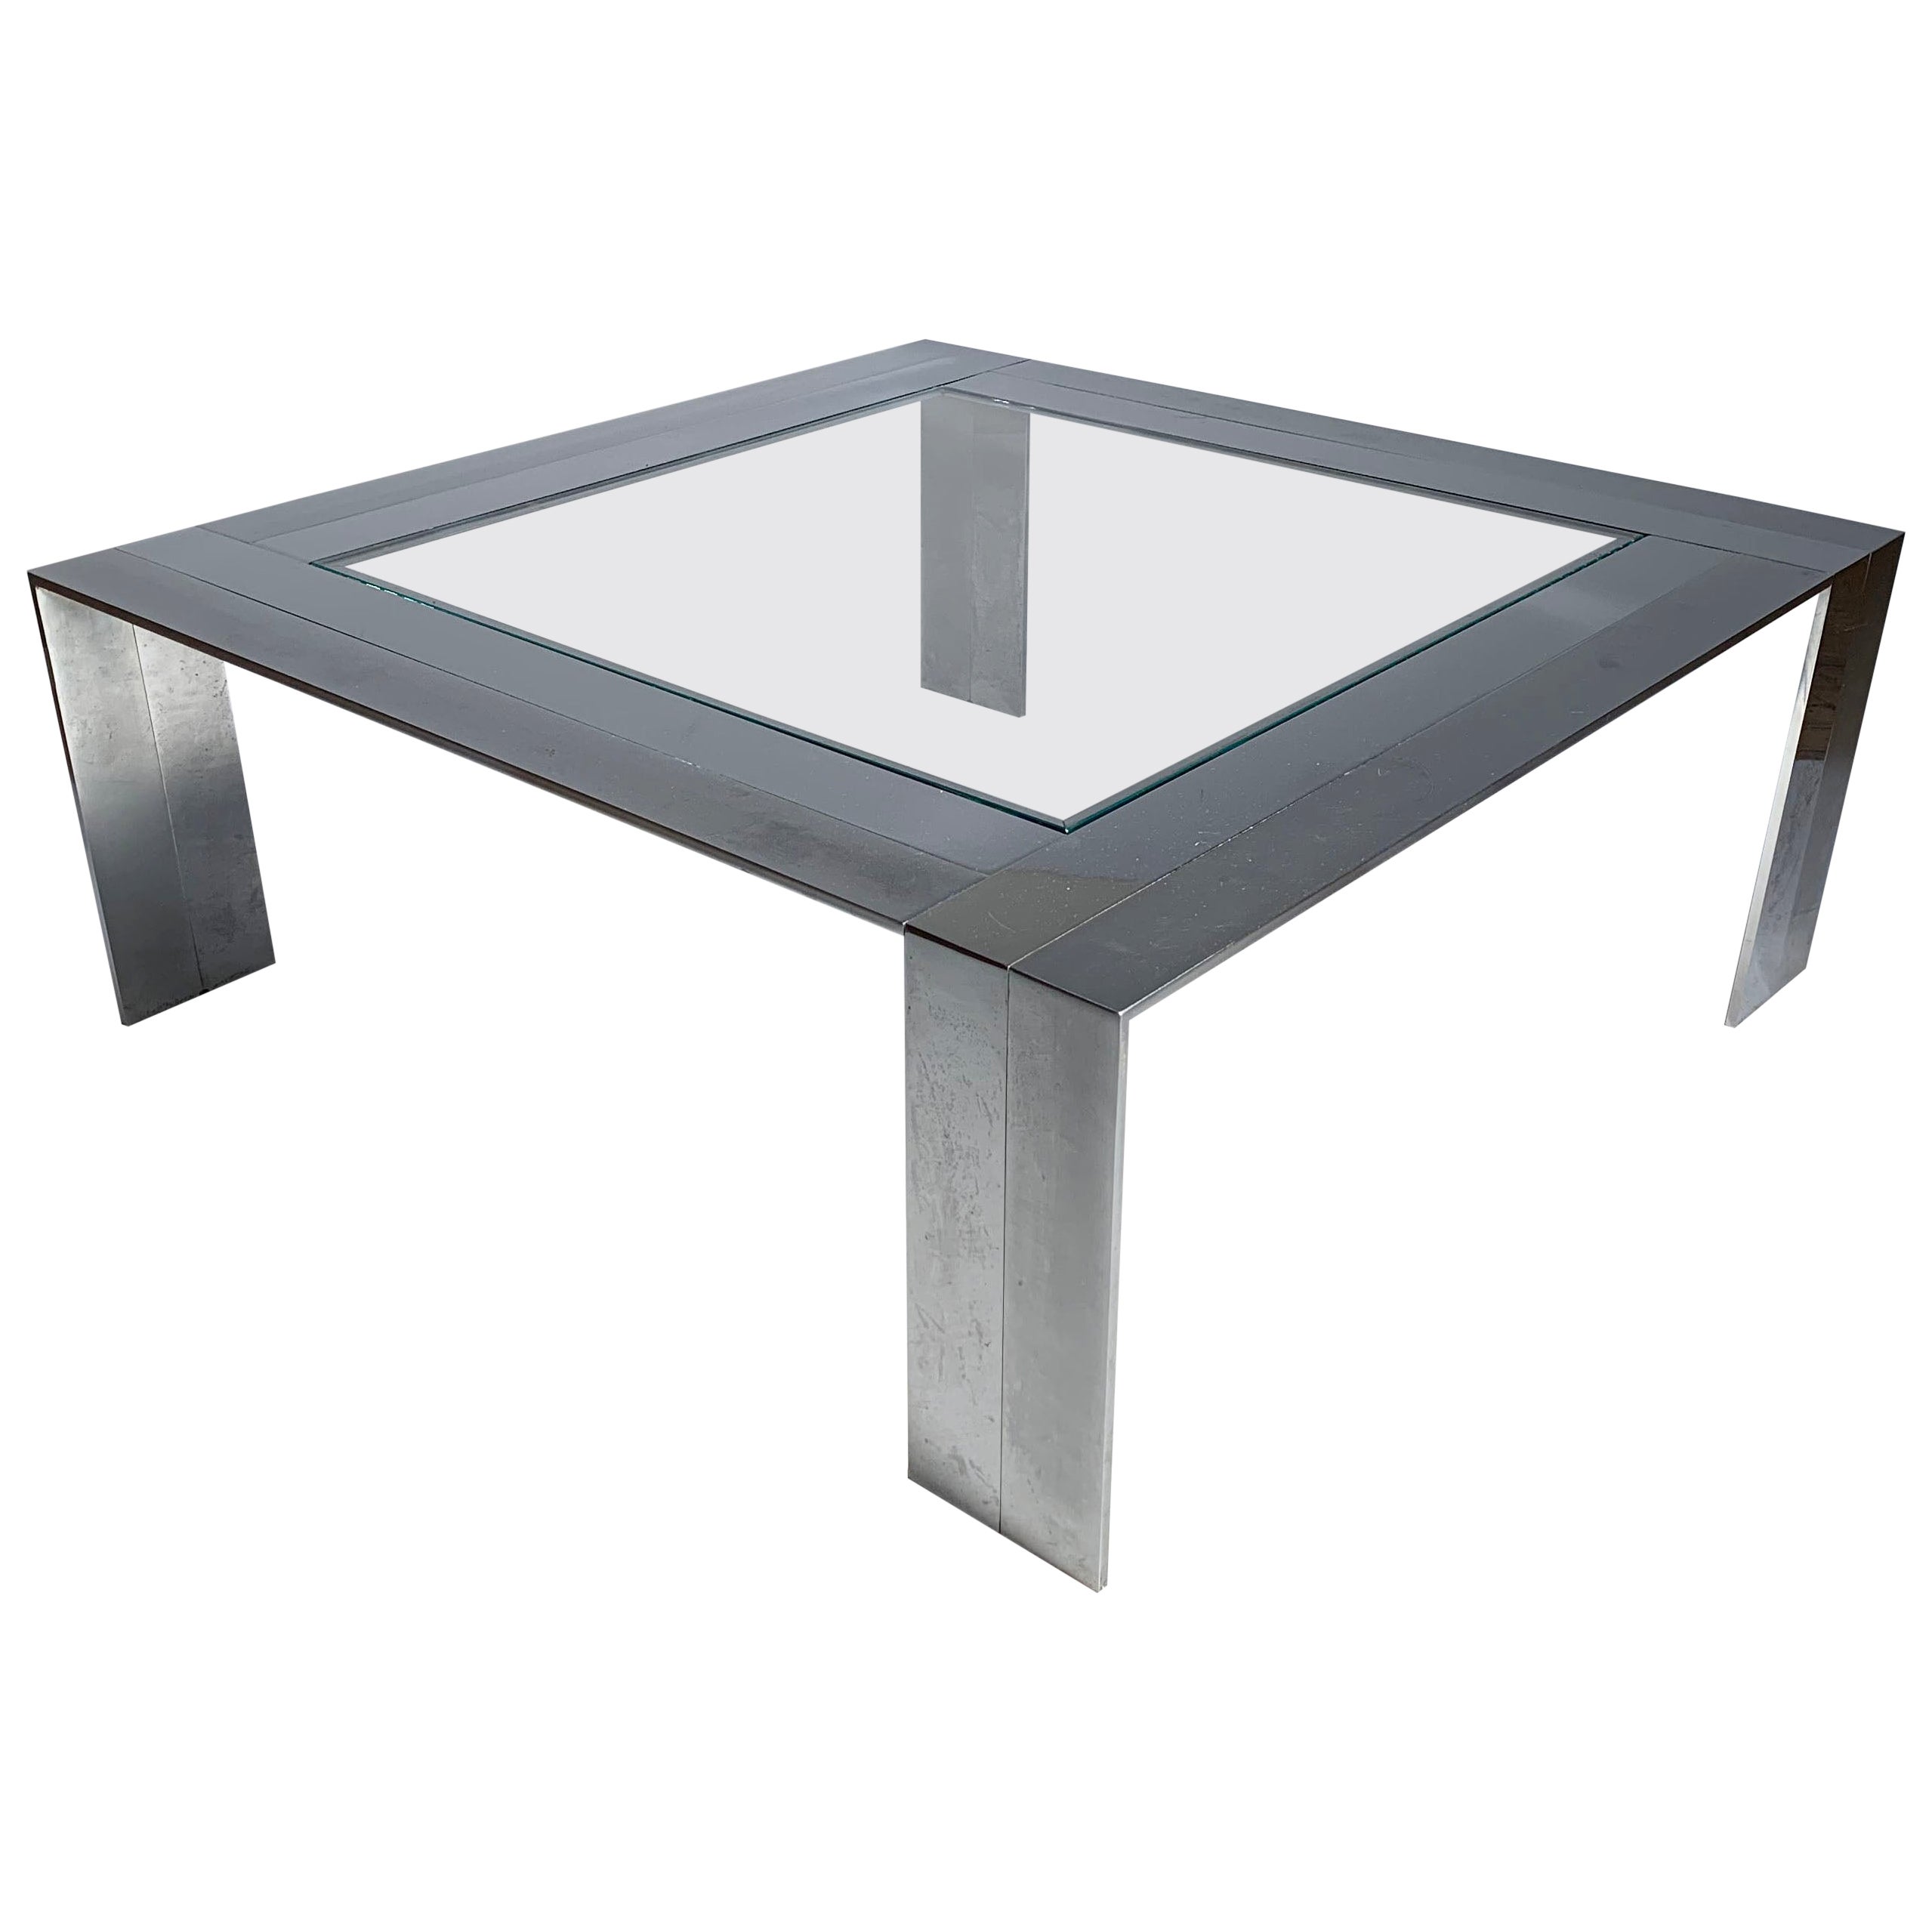 Vintage Steel and Glass Coffee Table by Elaine Cohen for DIA